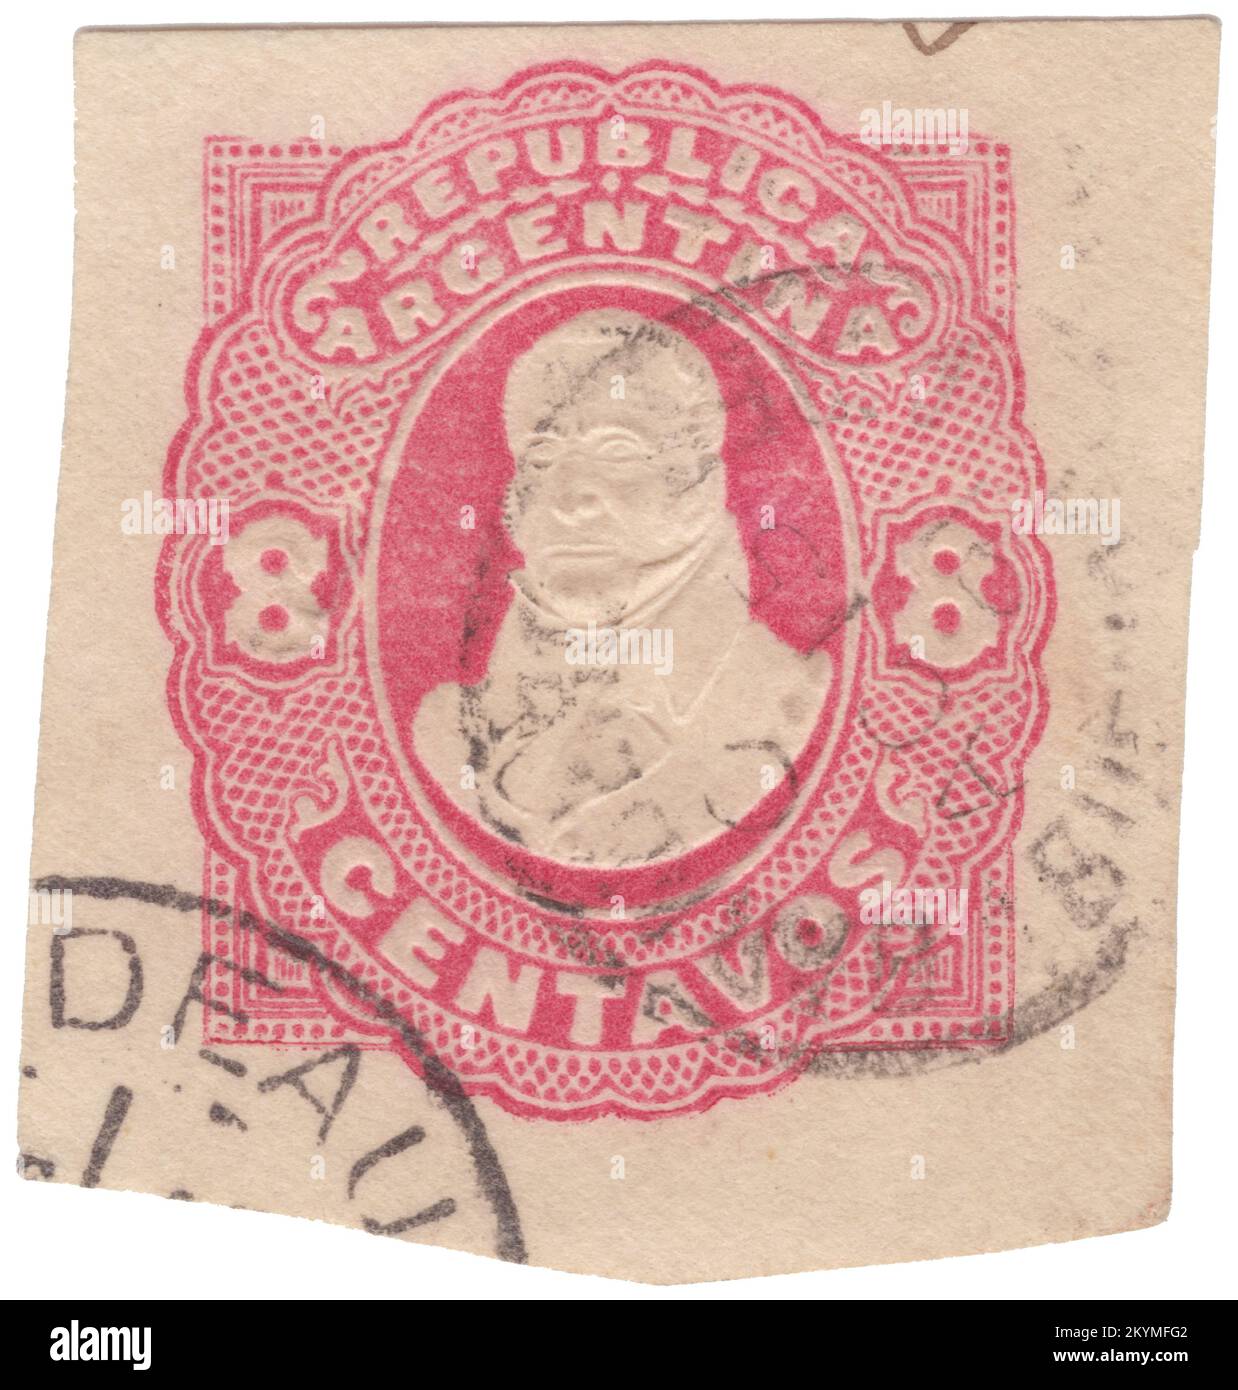 ARGENTINA - 1883: An fragment of original envelope with pre-printed 8 centavos rose-red postage stamp depicting portrait of José de San Martín (Jose Francisco de San Martín y Matorras), known as the Liberator of Argentina, Chile and Peru. Argentine general and the primary leader of the southern and central parts of South America's successful struggle for independence from the Spanish Empire who served as the Protector of Peru. Born in Yapeyú, Corrientes, in modern-day Argentina, he left the Viceroyalty of the Río de la Plata at the early age of seven to study in Málaga, Spain Stock Photo